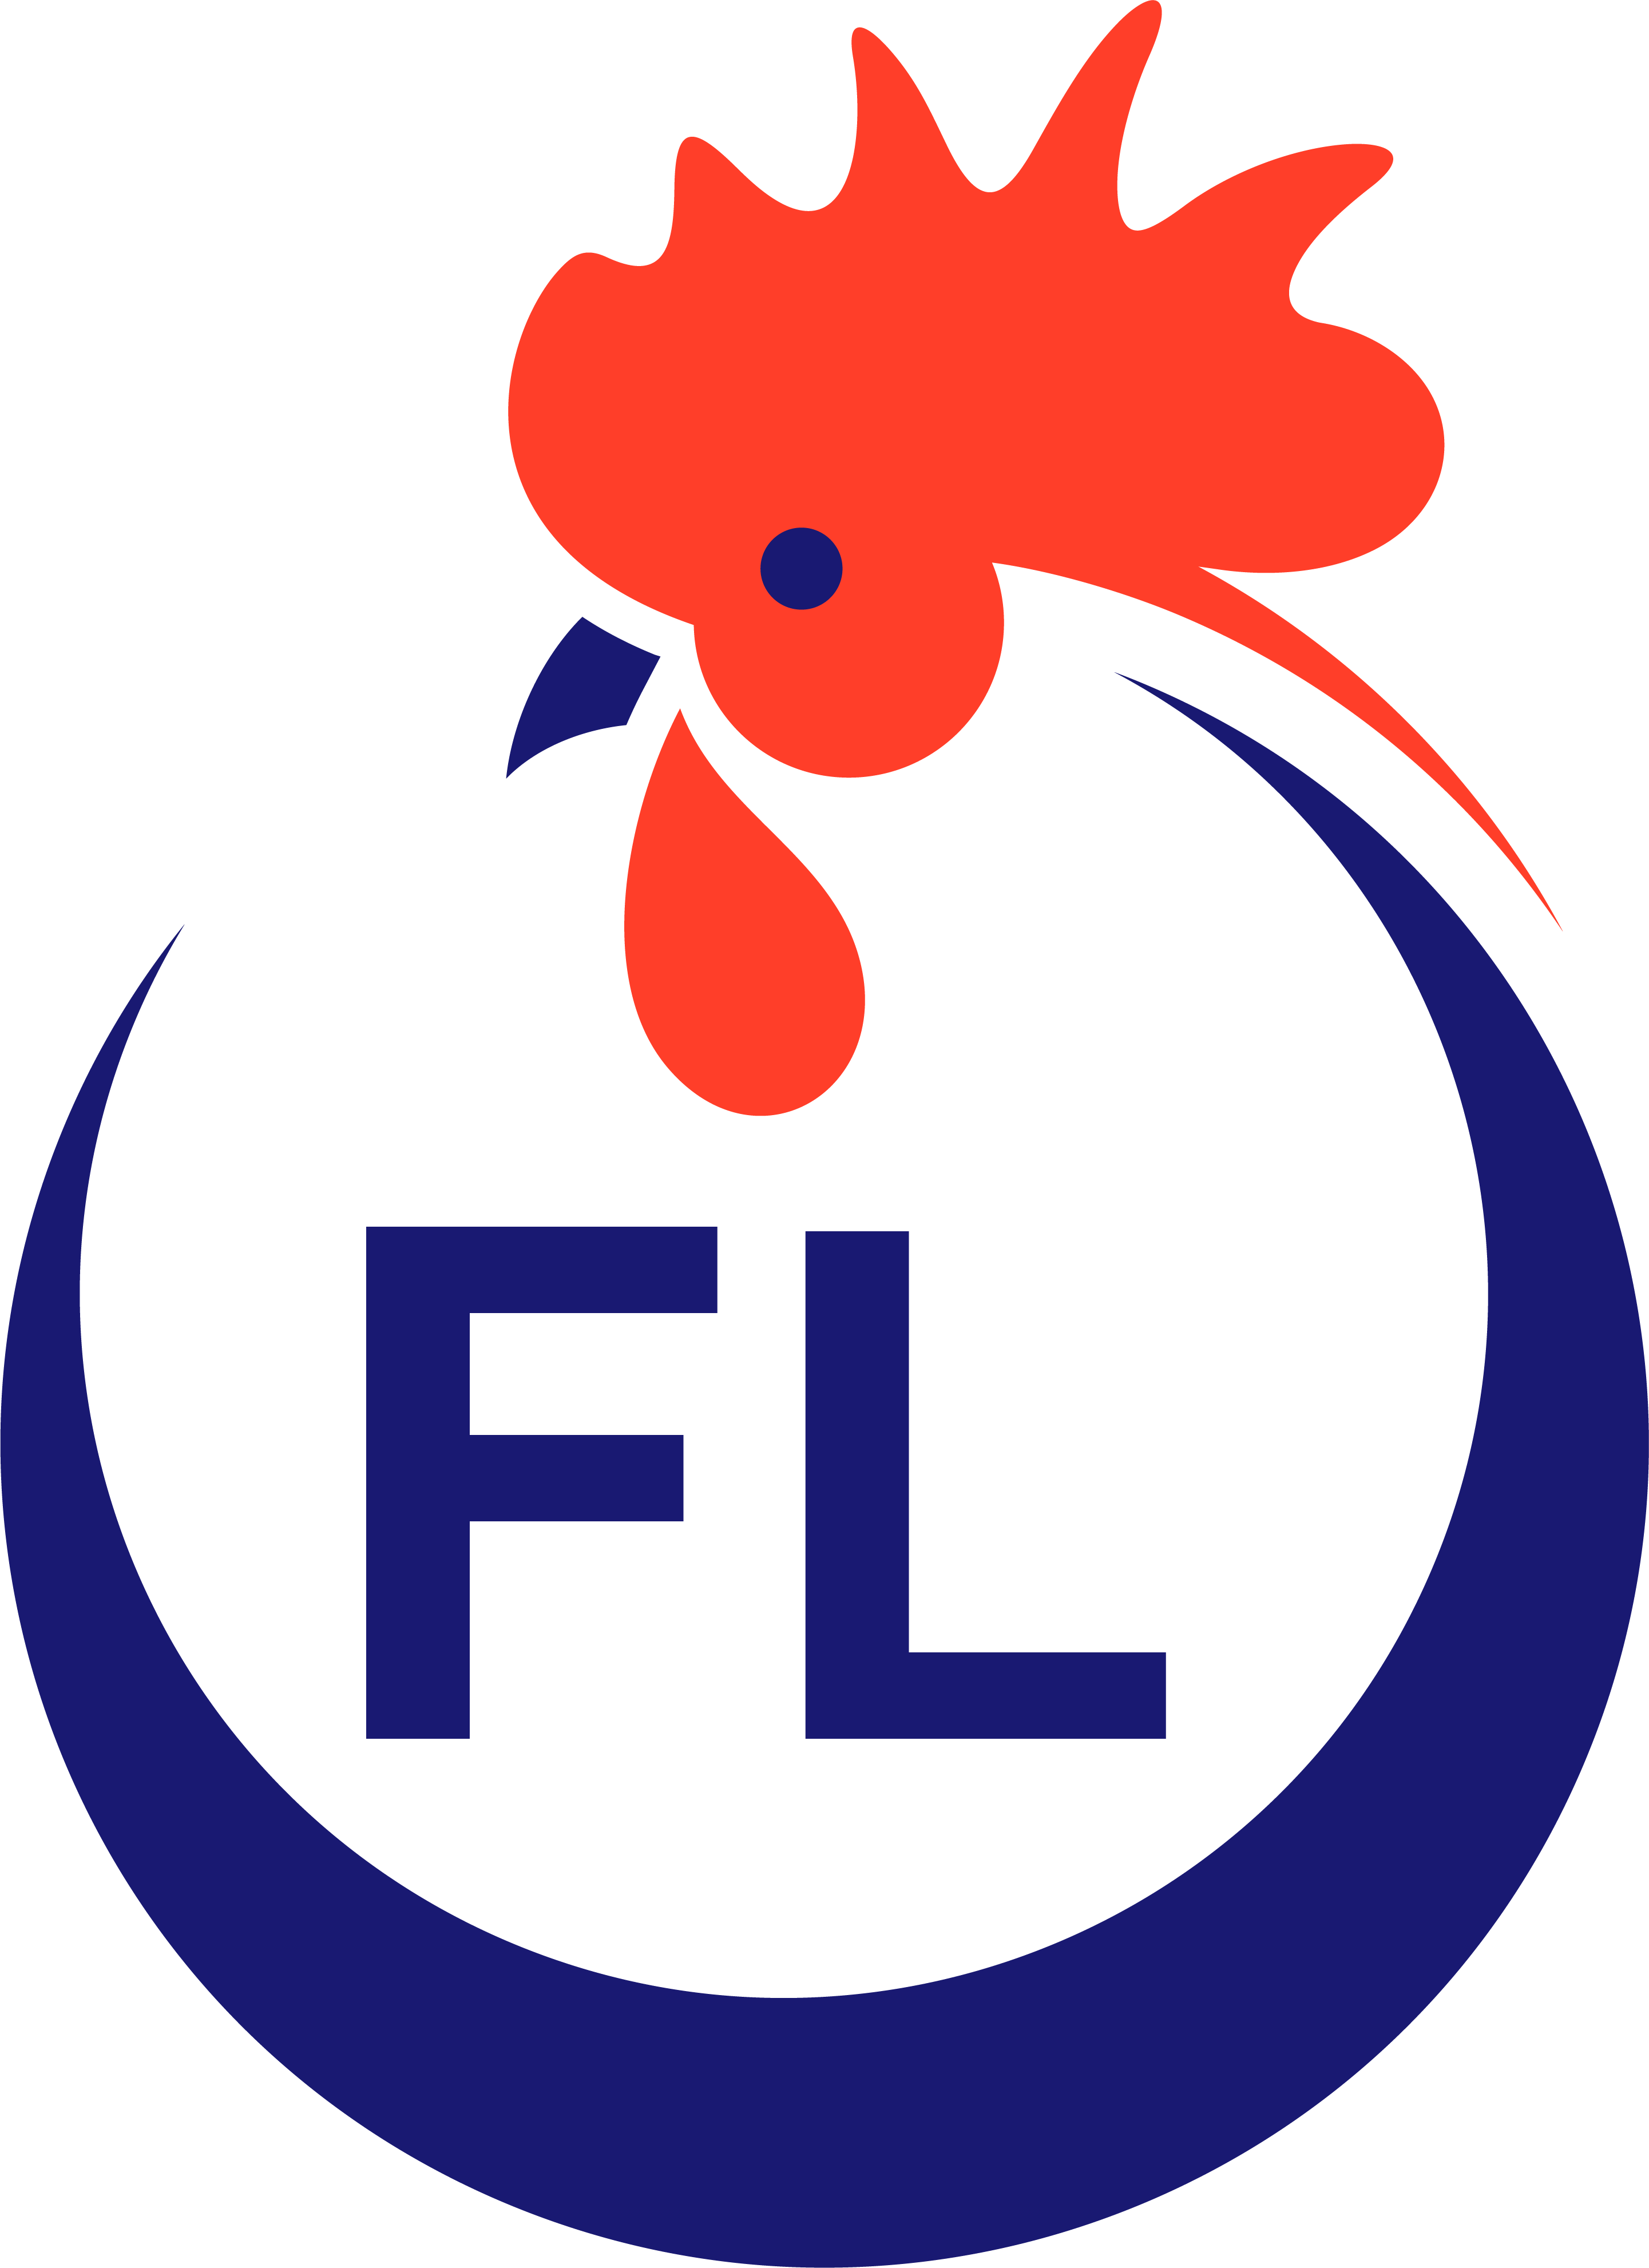 Florida rooster icon